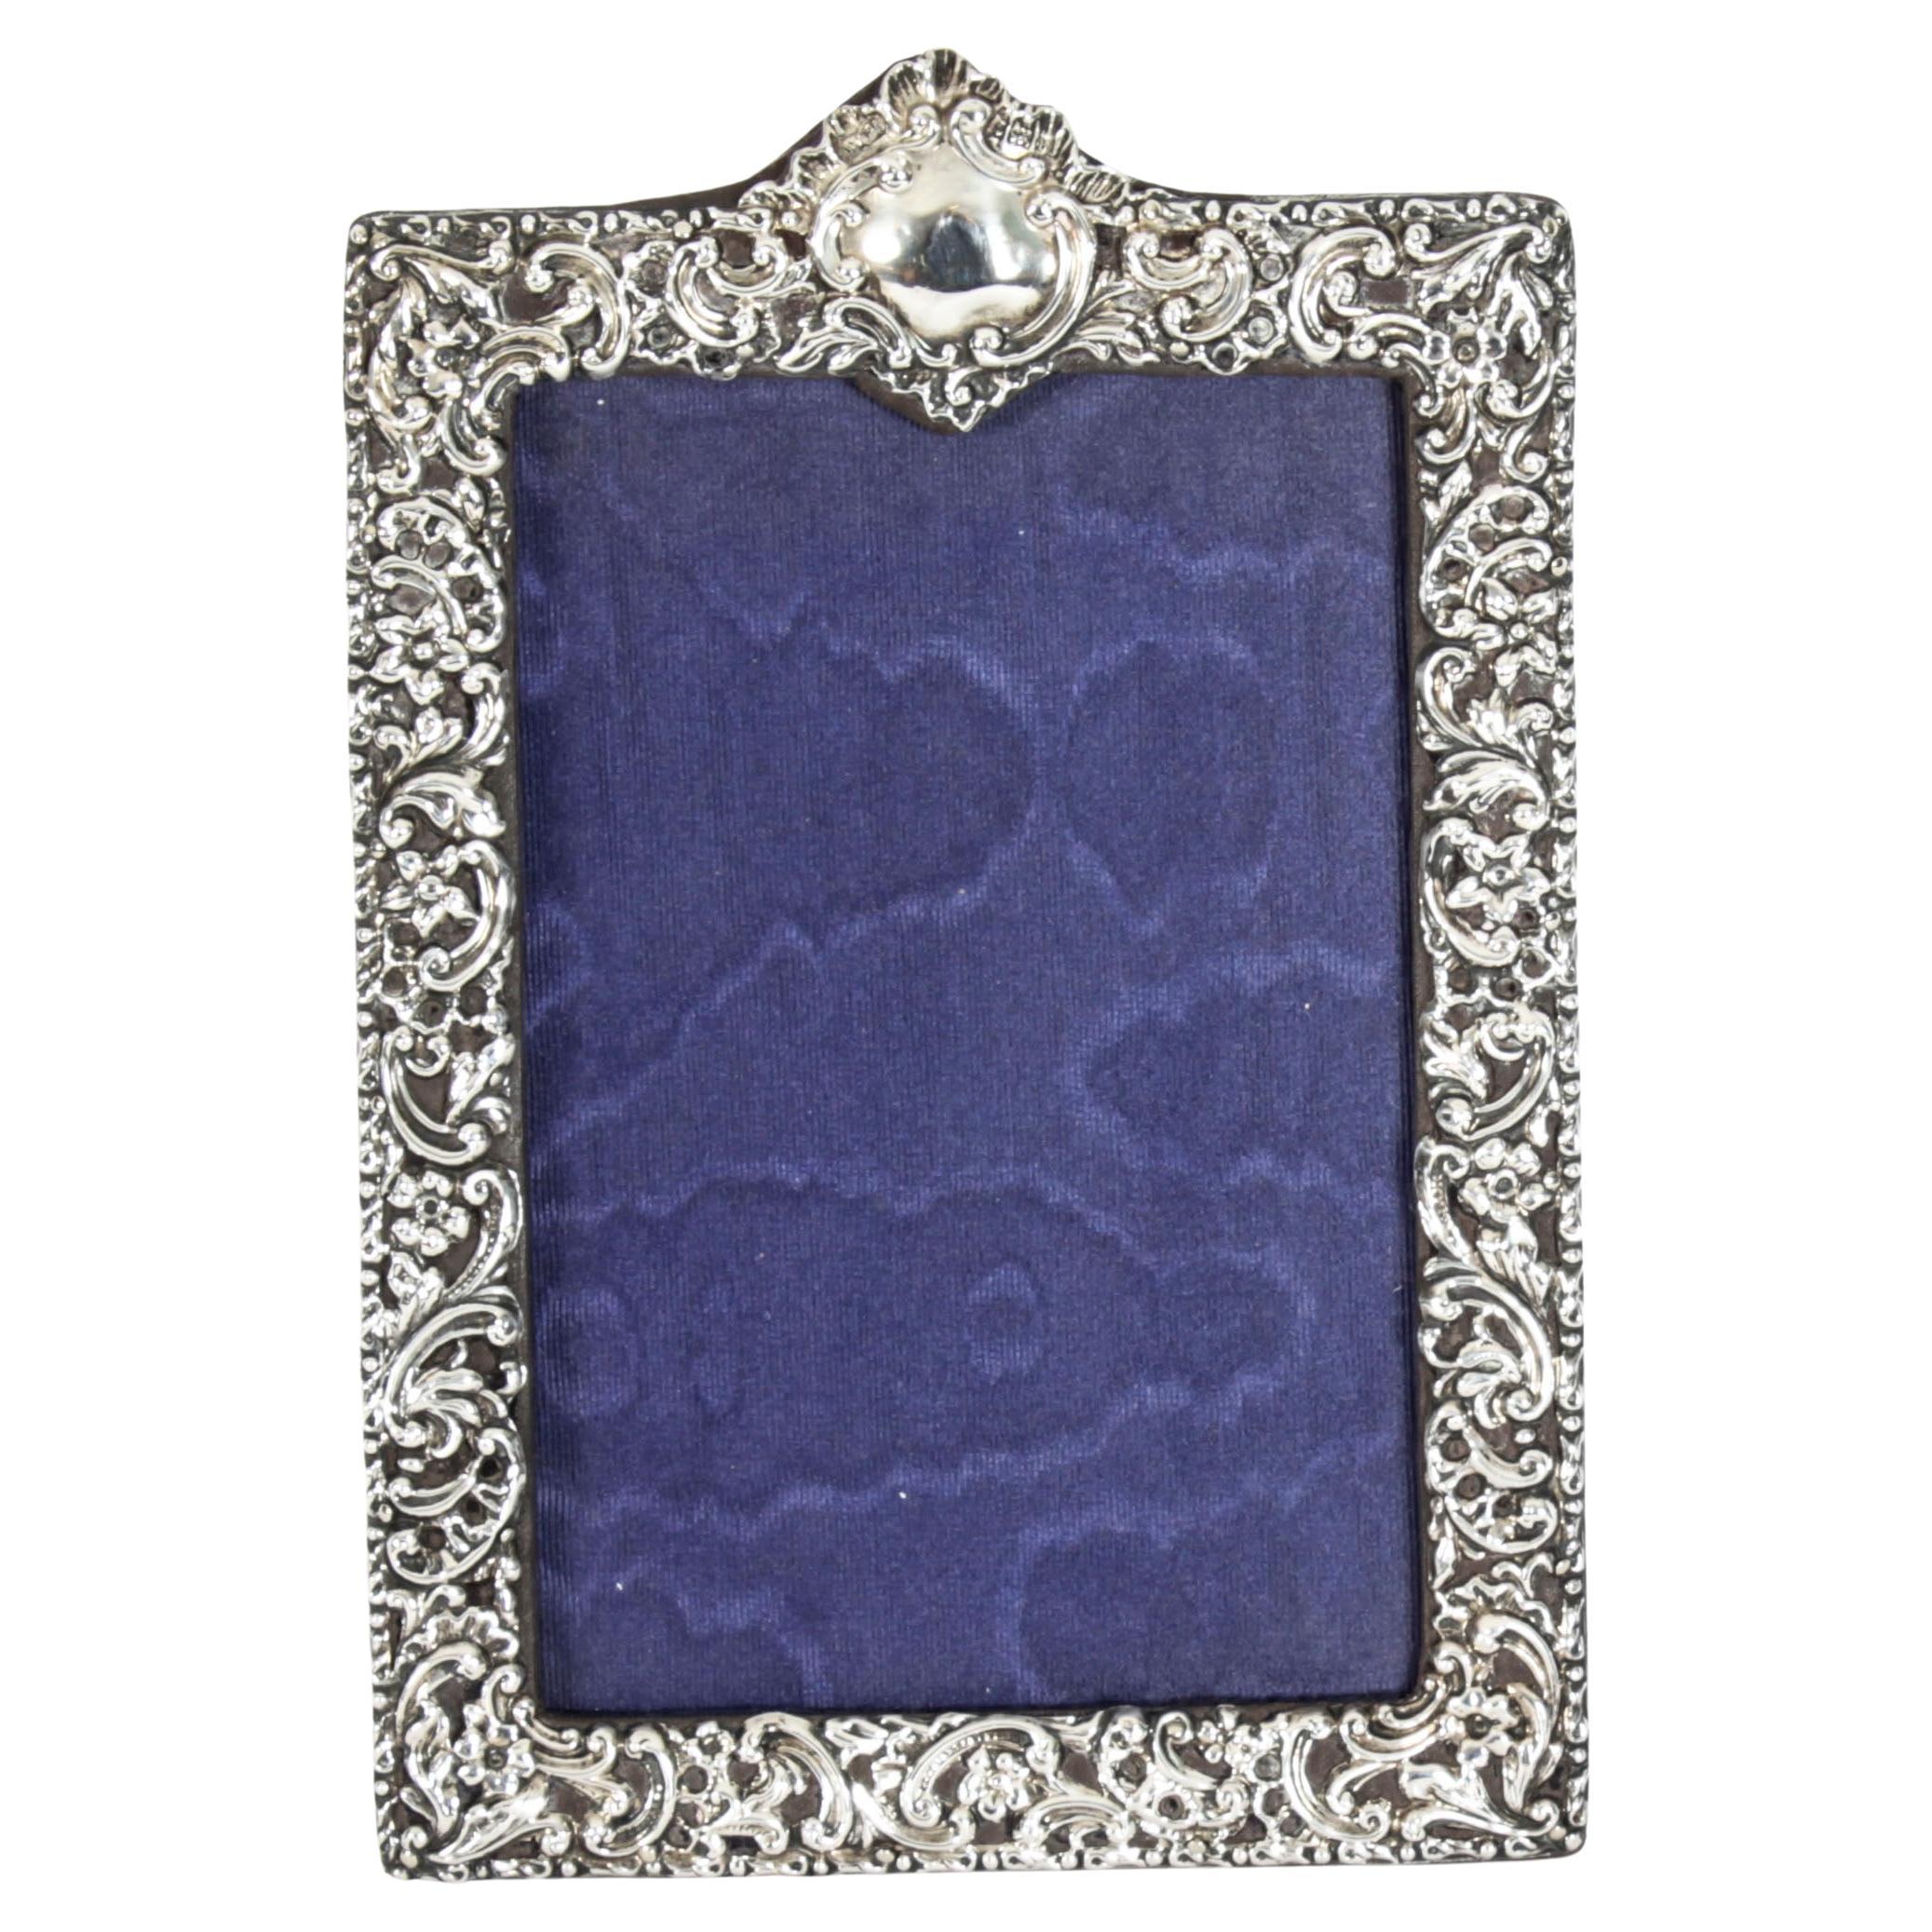 Antique Edwardian Sterling Silver Photo Frame, Dated 1901